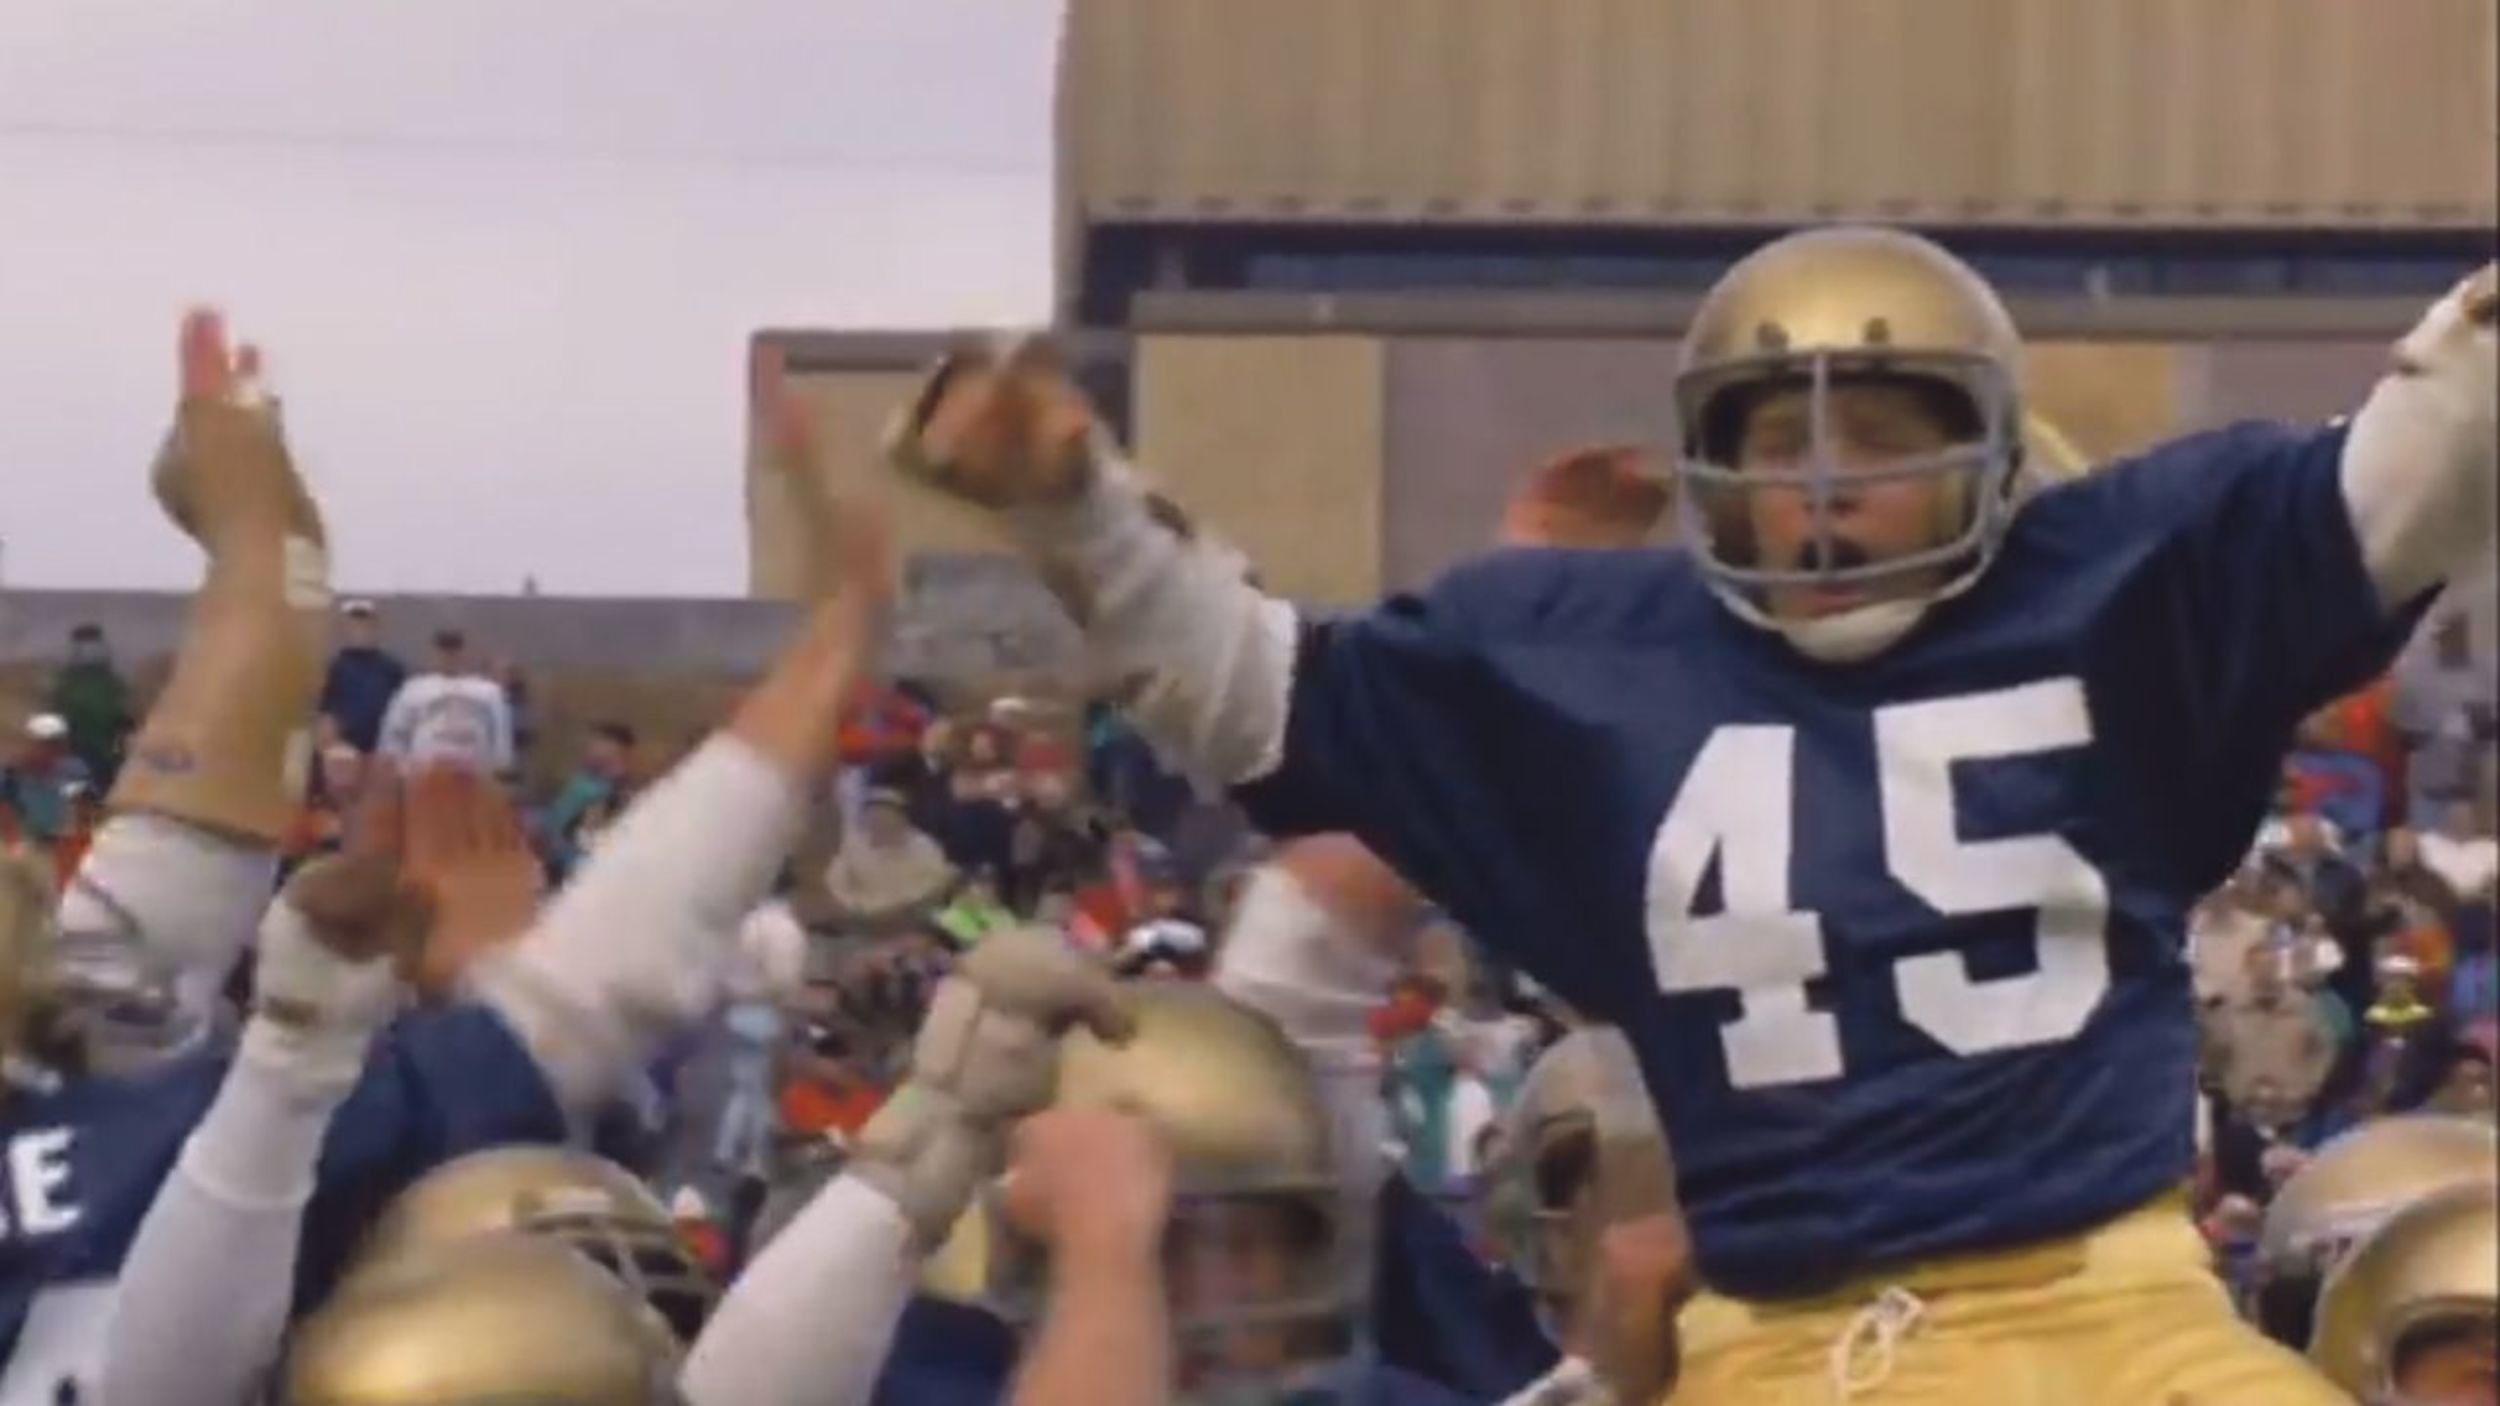 <p>When you think “underdog sports movie,” the first name you might think is “Rudy.” Sean Astin stars as a young man who dreams of playing for Notre Dame despite his relatively-small stature. And yet, through determination, he makes it happen. It sort of became the template for any aspiring athlete who was told they didn’t have the size to compete.</p><p>You may also like: <a href='https://www.yardbarker.com/general_sports/articles/the_most_infamous_plays_in_sports_history_022224/s1__31966766'>The most infamous plays in sports history</a></p>